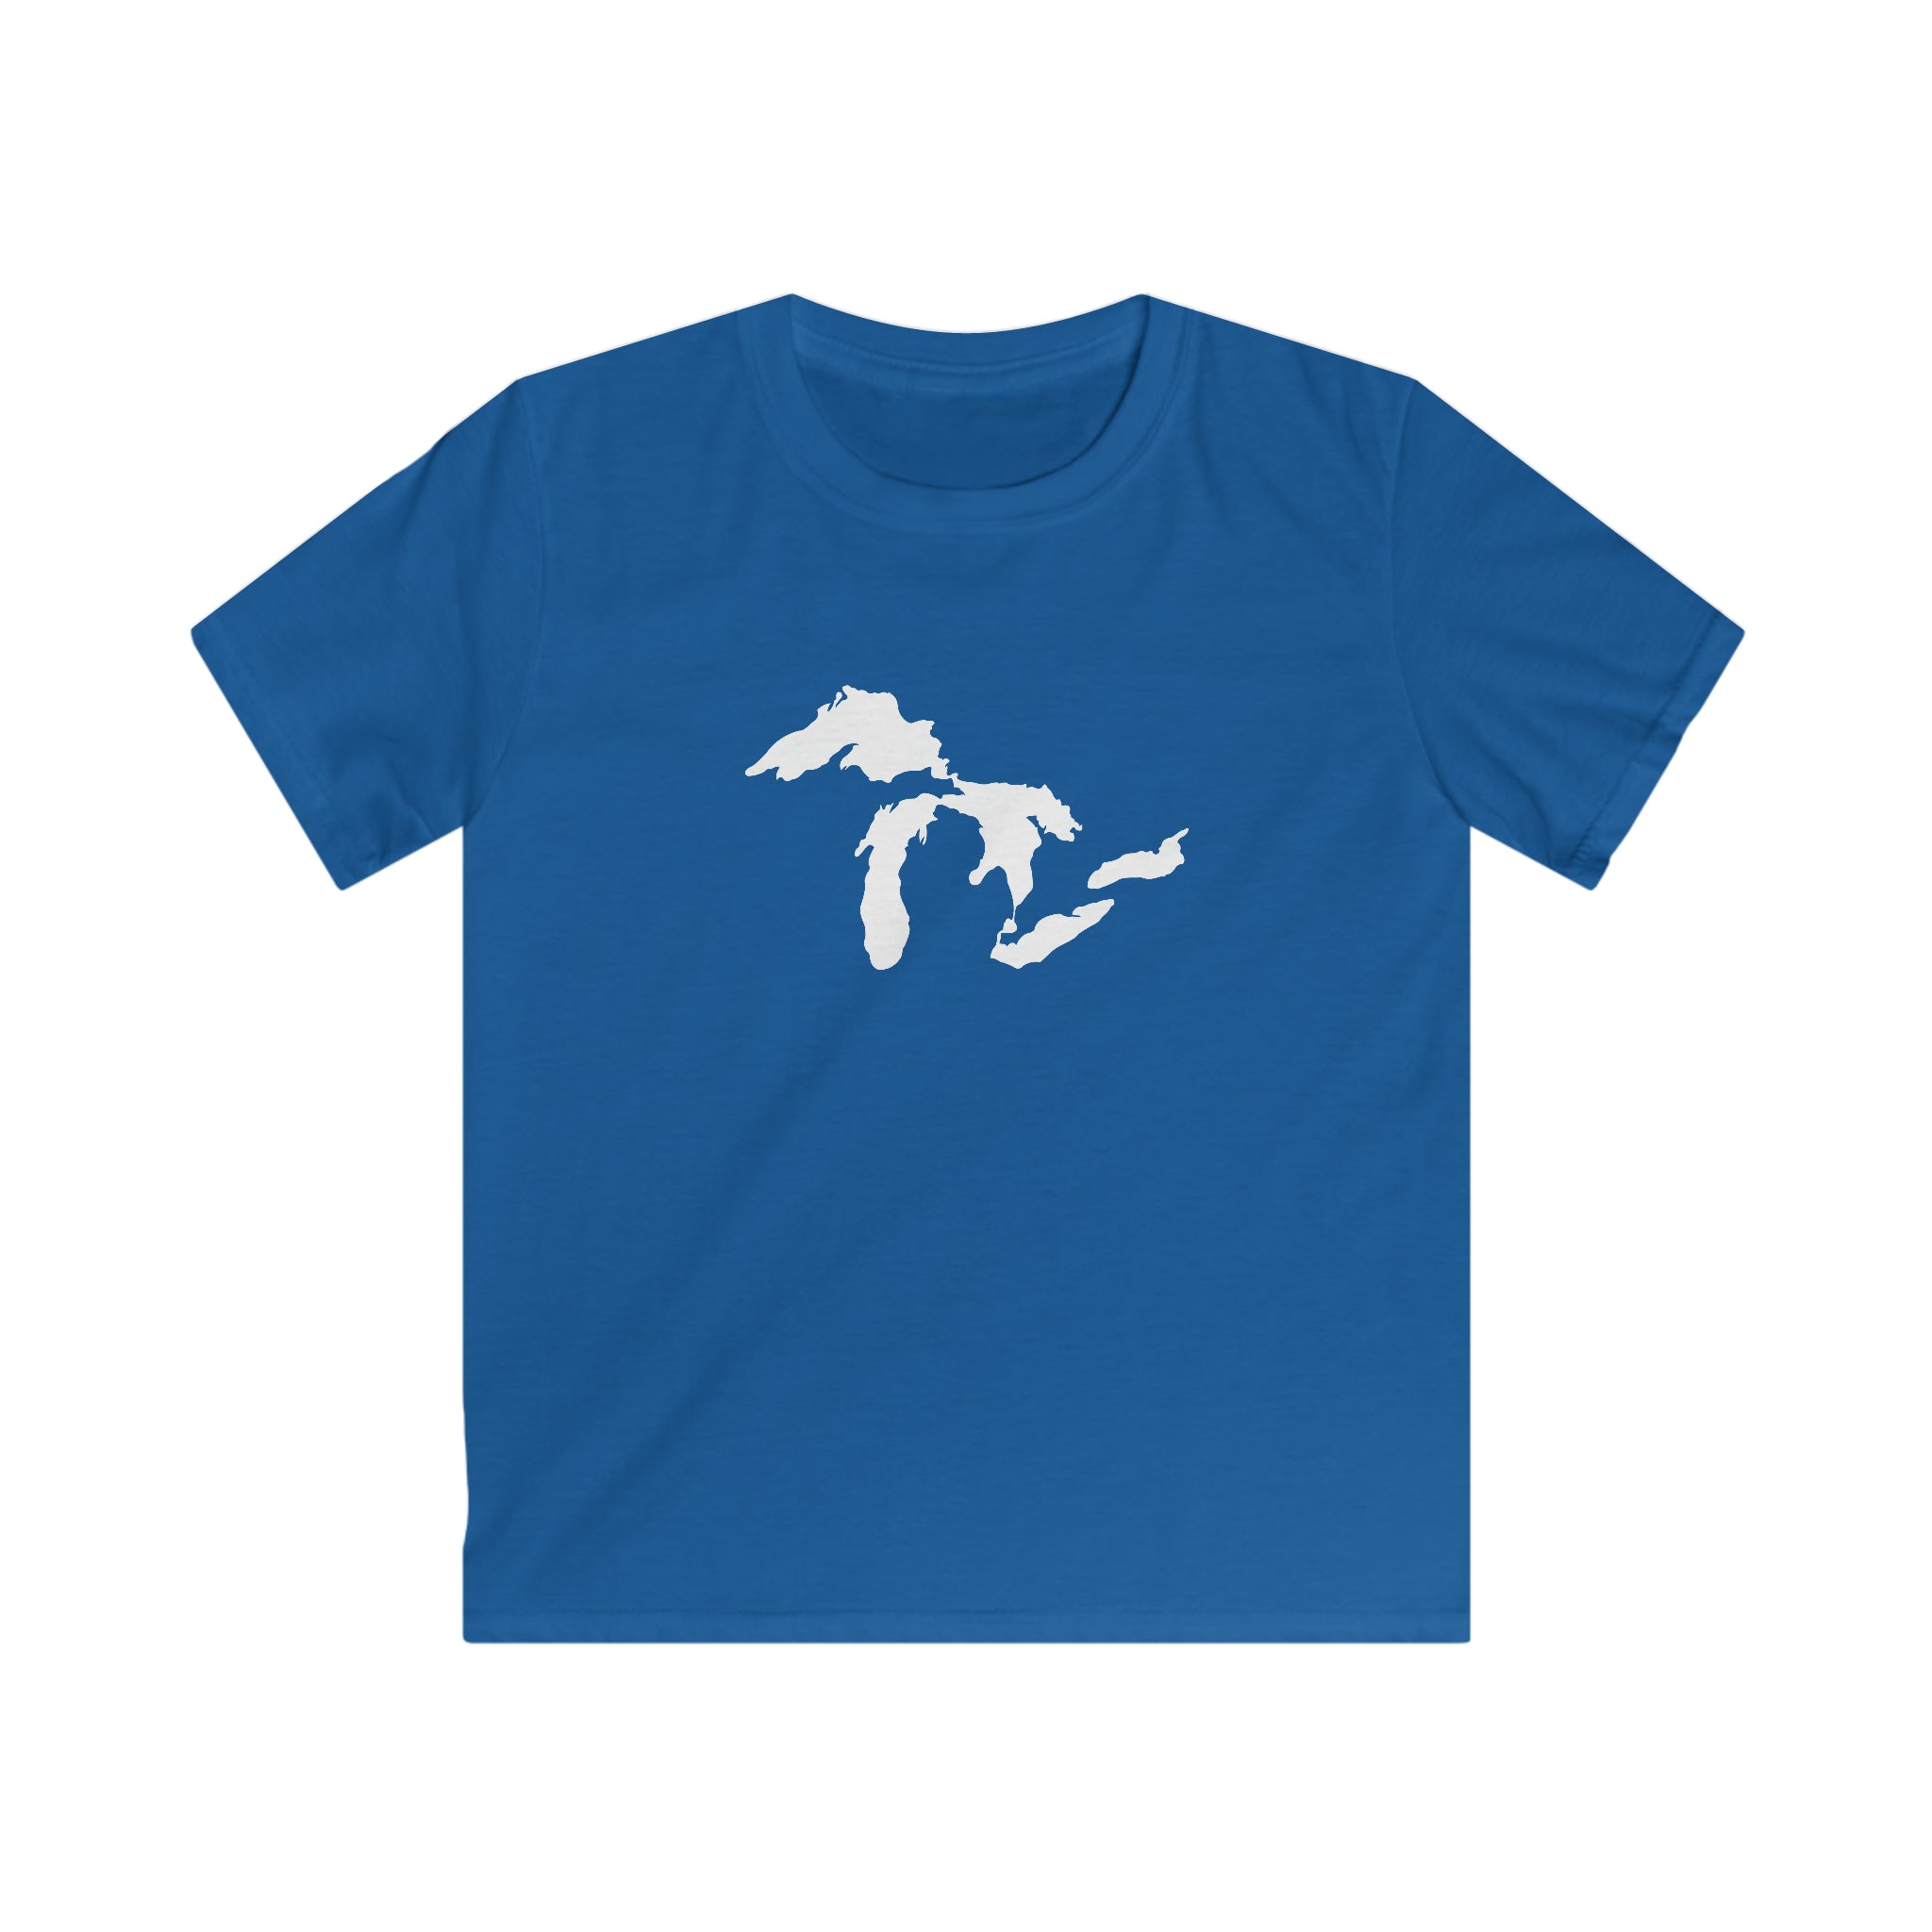 Kids T "Great Lakes"